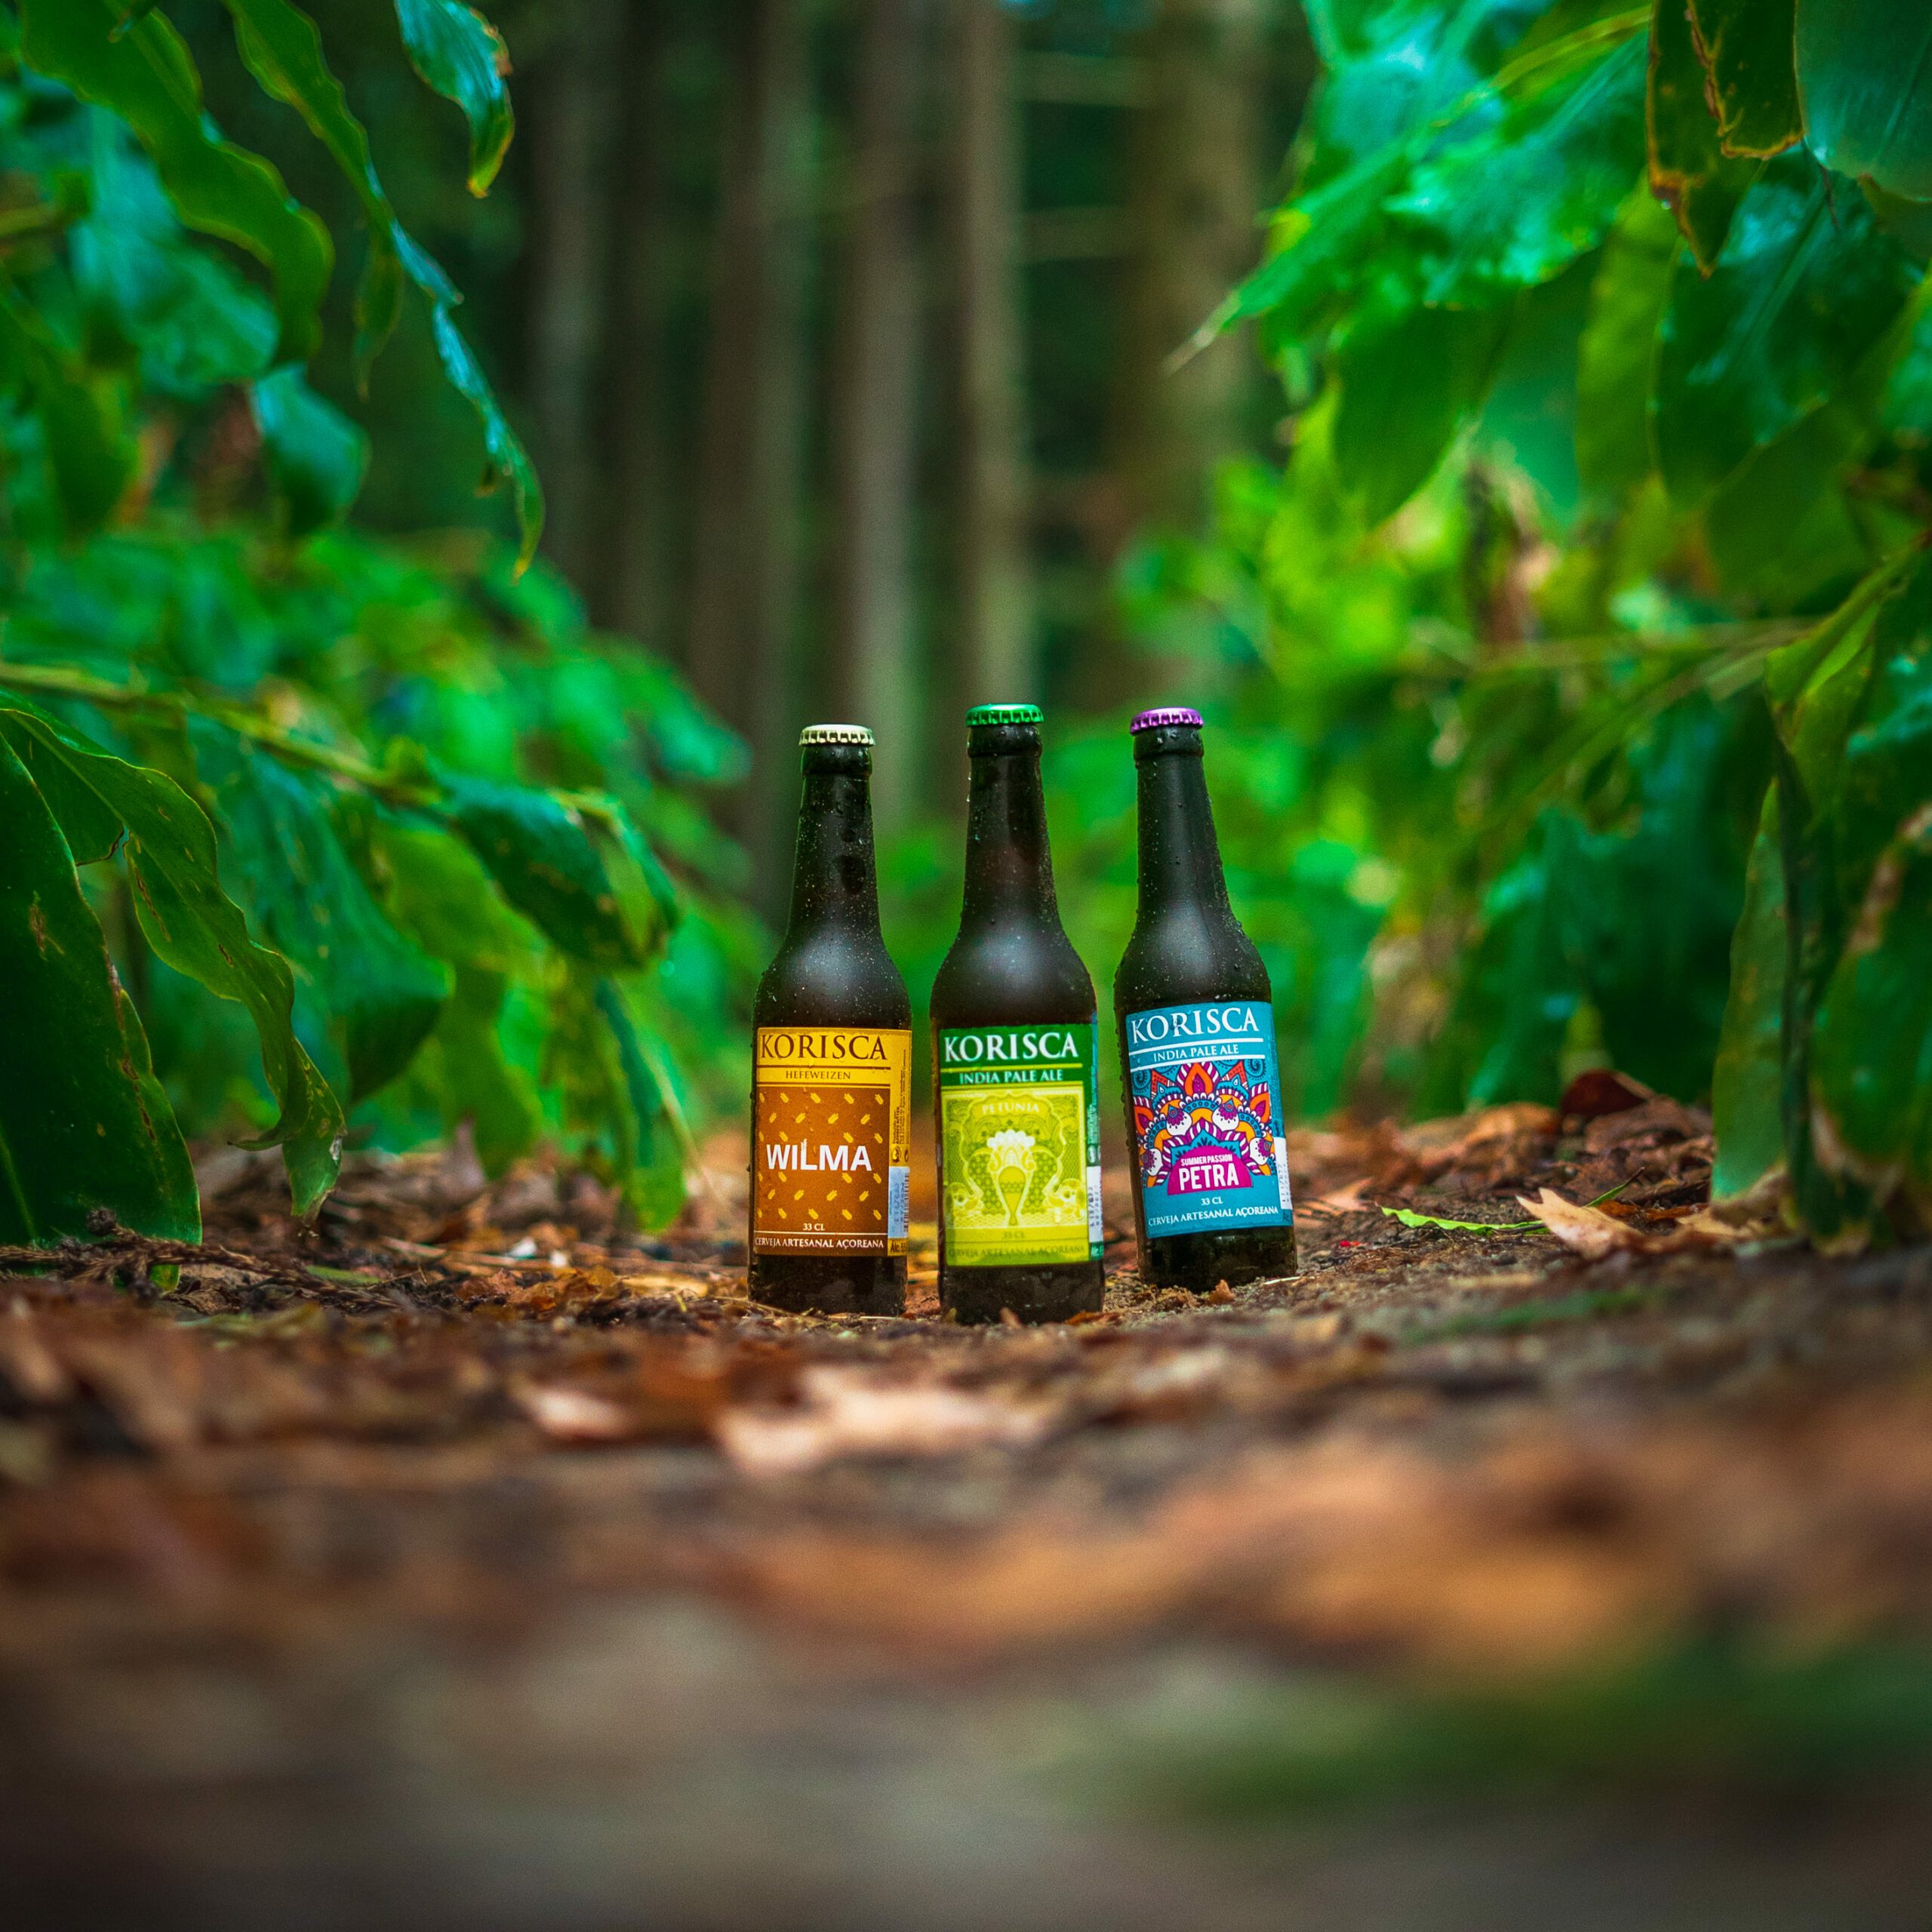 Three Korisca craft beers, the Wilma (Hefeweizen), the Petunia (IPA) and the Petra (IPA), on the brown-leaf covered floor, surrounded by green vegetation, with trees in the background, Sete Cidades, Ponta Delgada, São Miguel, Azores.